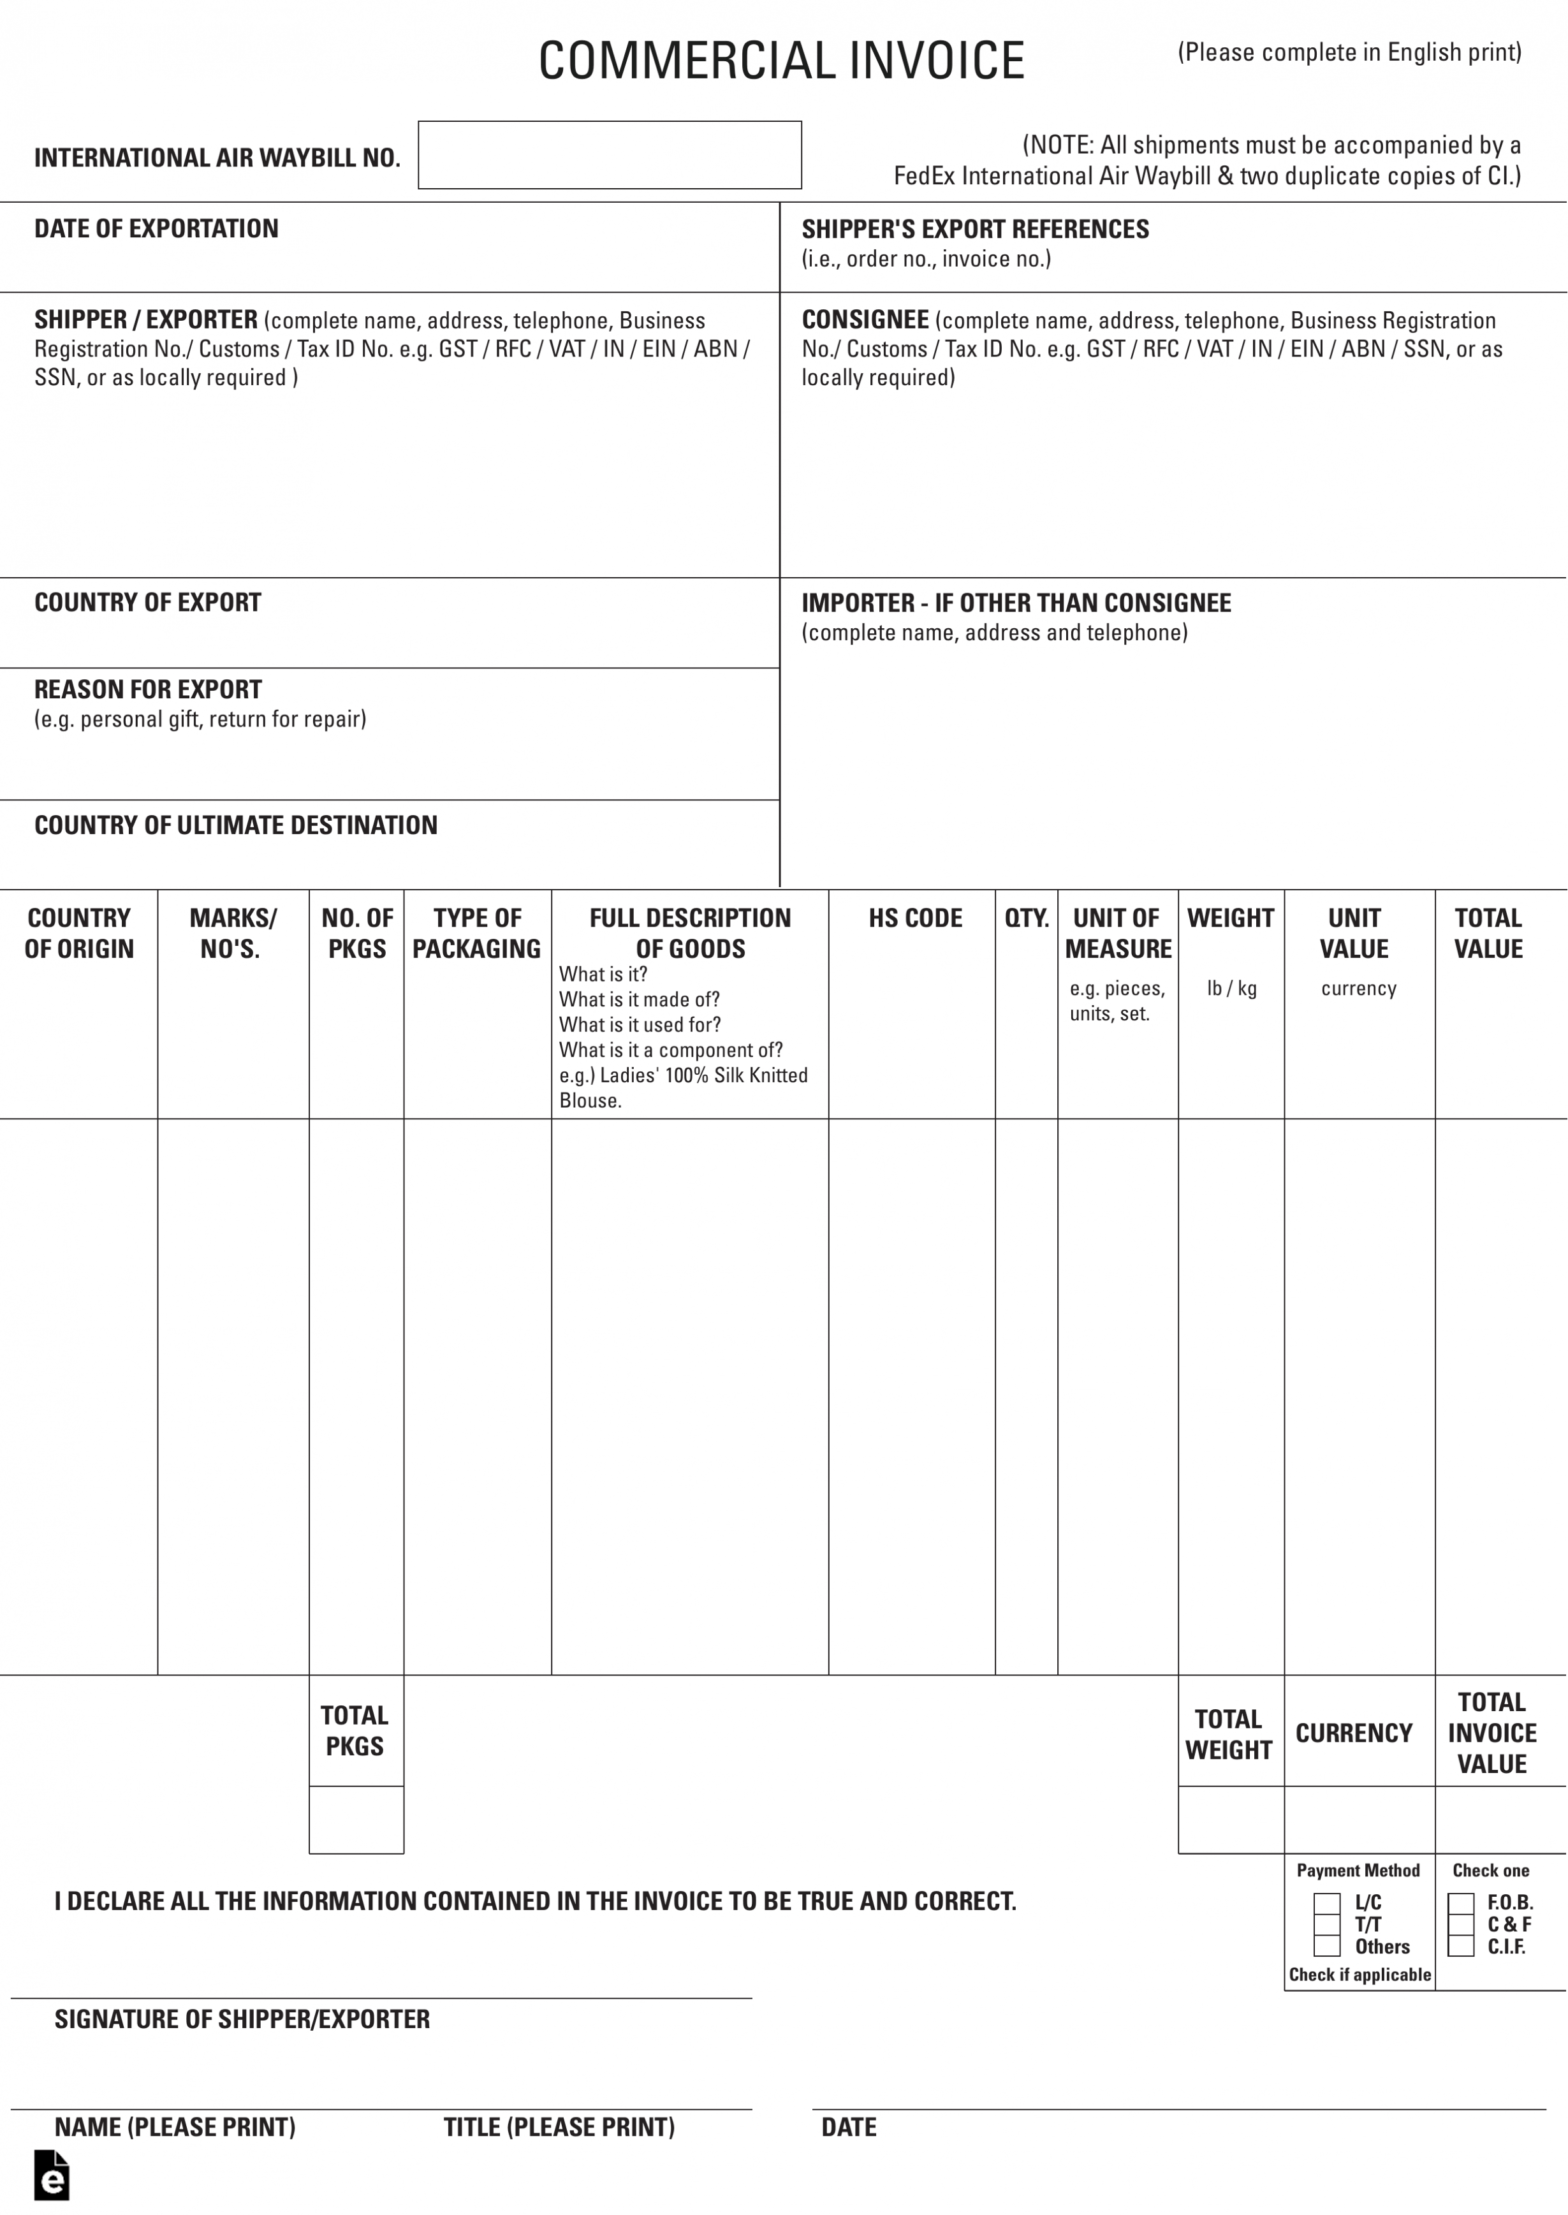 Free International Commercial Invoice Templates - Pdf | Eforms within Customs Commercial Invoice Template